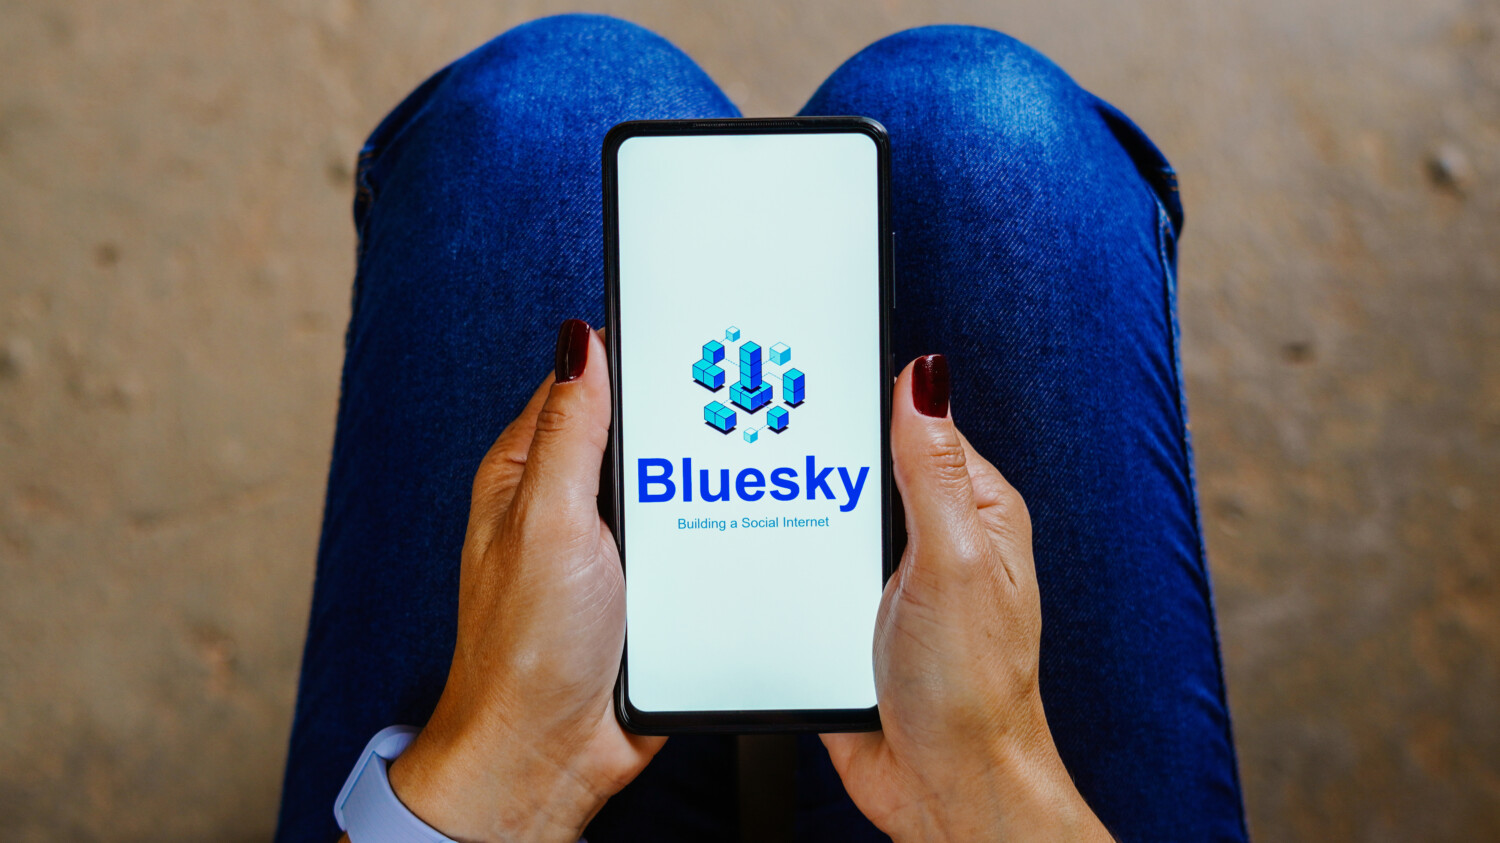 Bluesky Attracts Nearly 800K New Users In First Day Open To The Public, Despite Outages